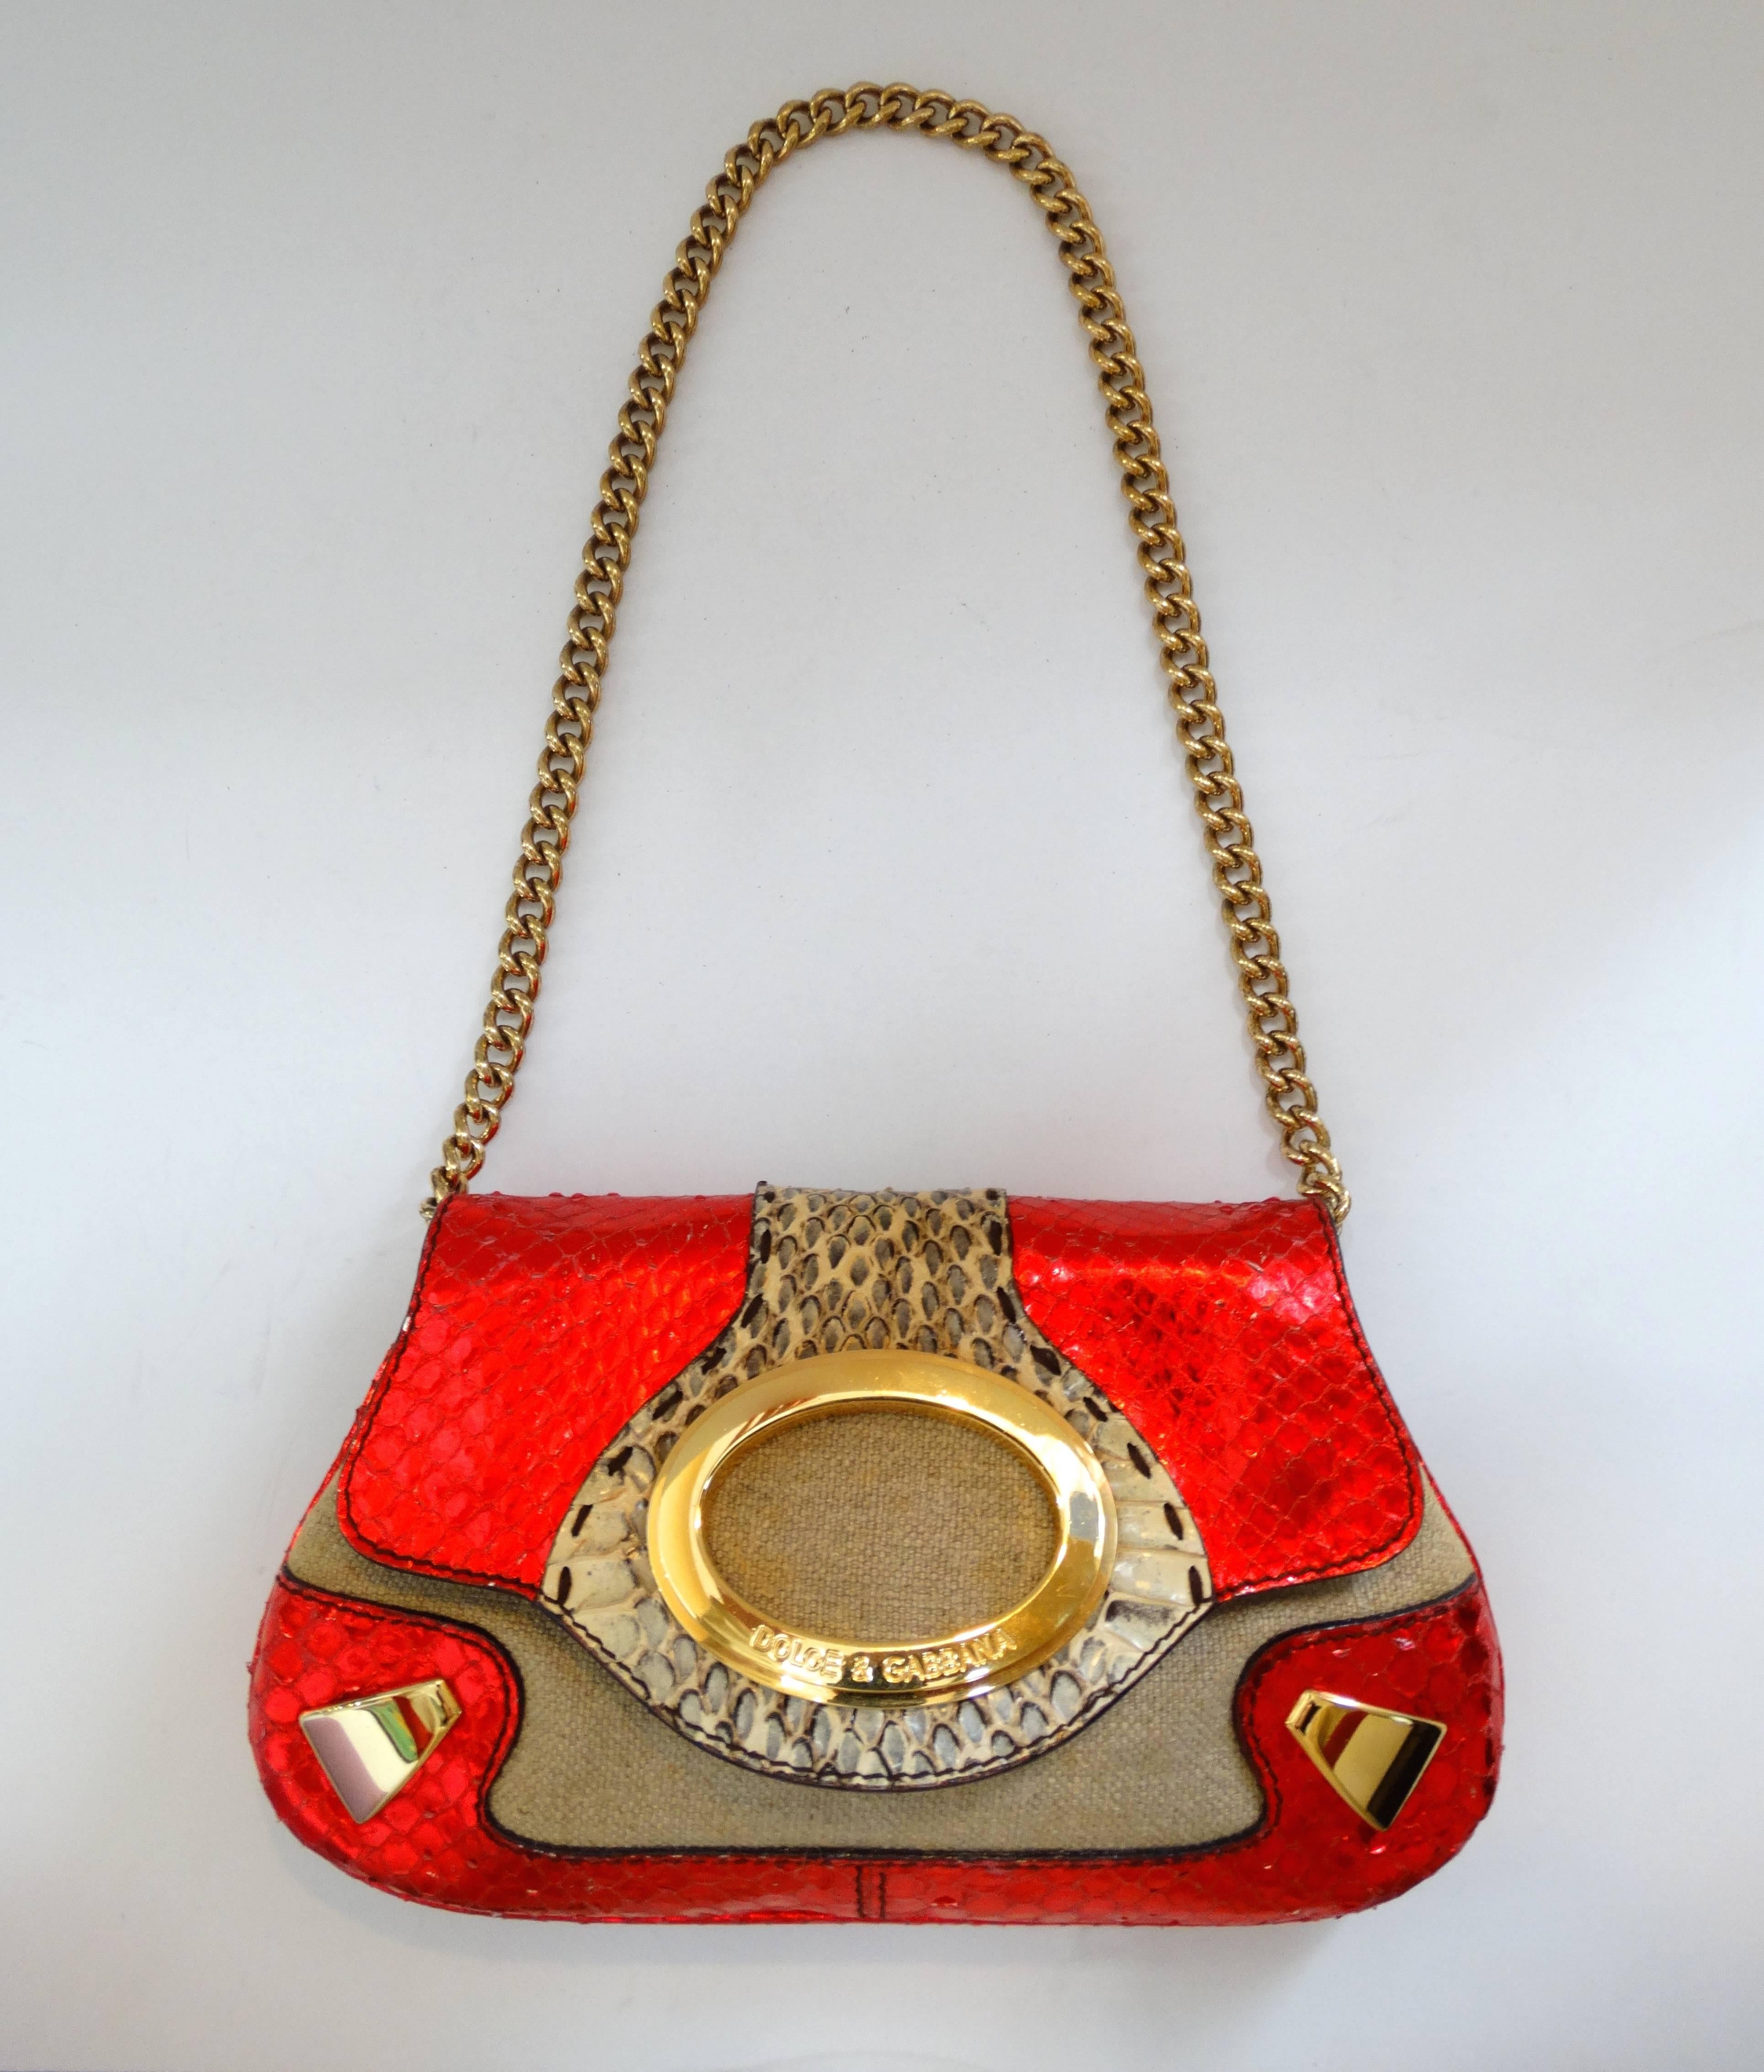 Your new favorite going out bag has landed! This amazing Dolce & Gabbana bag is made of a metallic lipstick red snakeskin embossed leather, contrasted with tan snakeskin down the middle. Burlap like canvas material beneath the flap, accented by gold